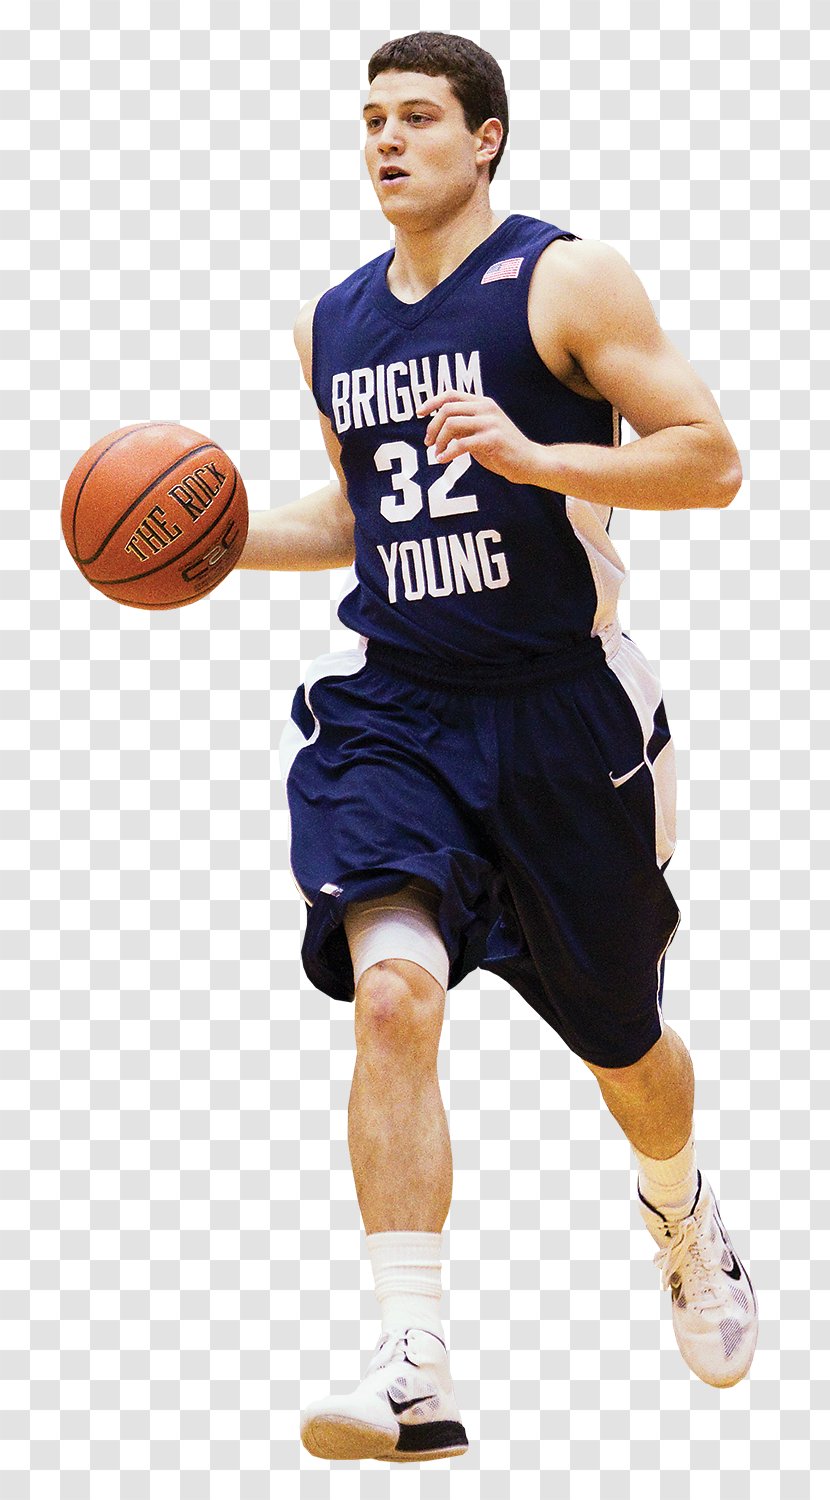 Jimmer Fredette Basketball Player PCD Pharma Franchise Serbia Molecules Private Limited Brigham Young University - Sports Transparent PNG